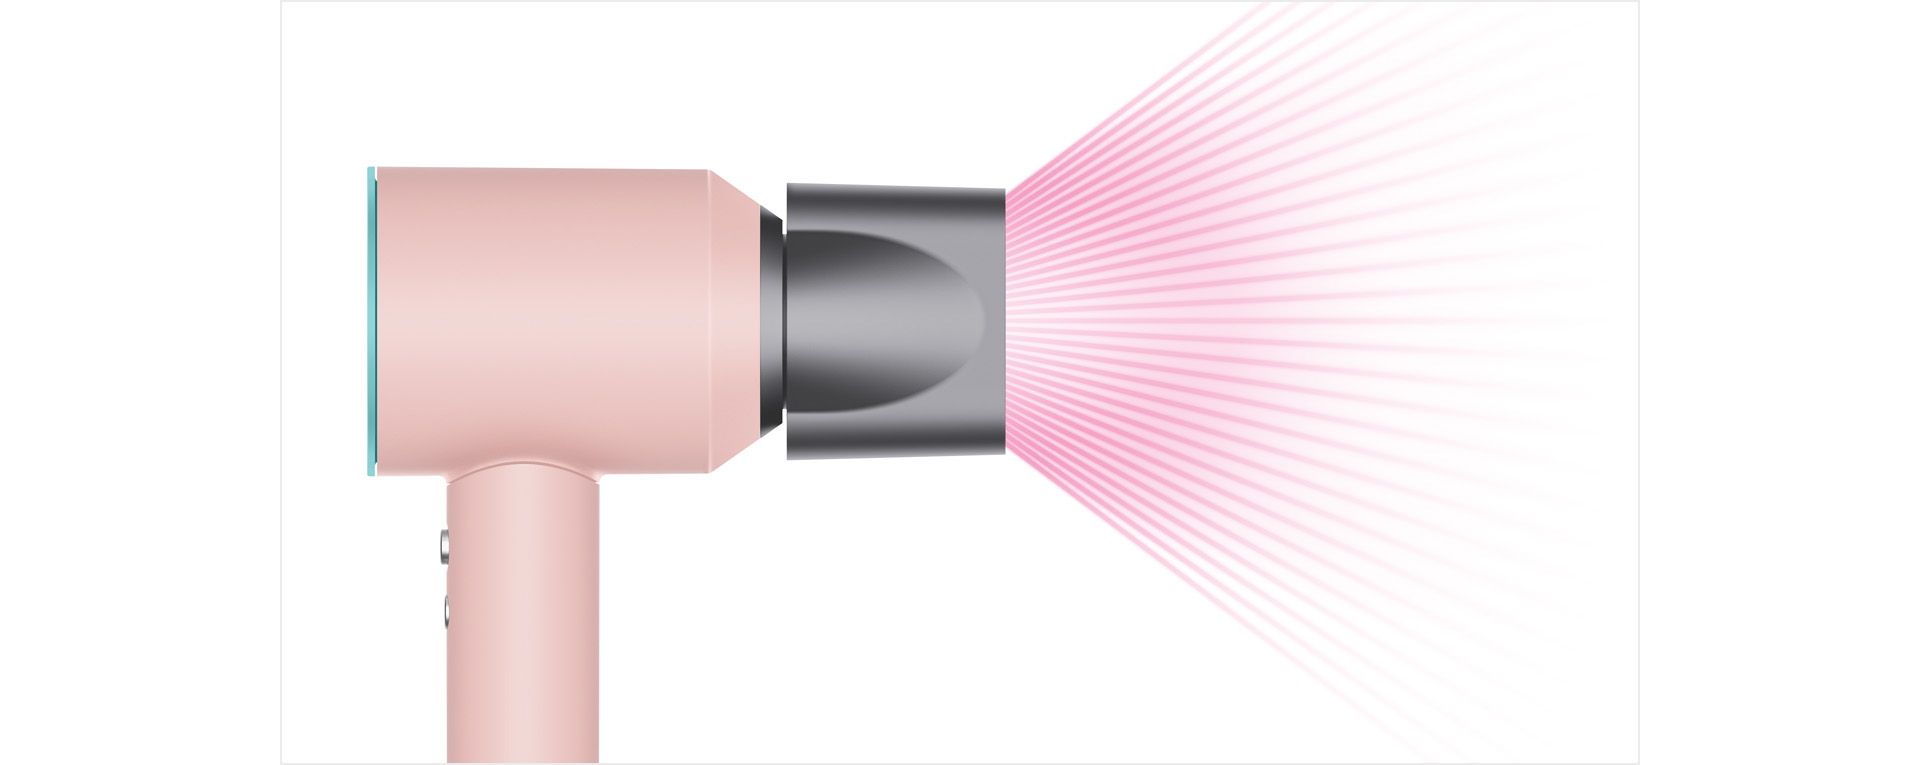 Profile view of Dyson Supersonic with Smoothing nozzle attachment